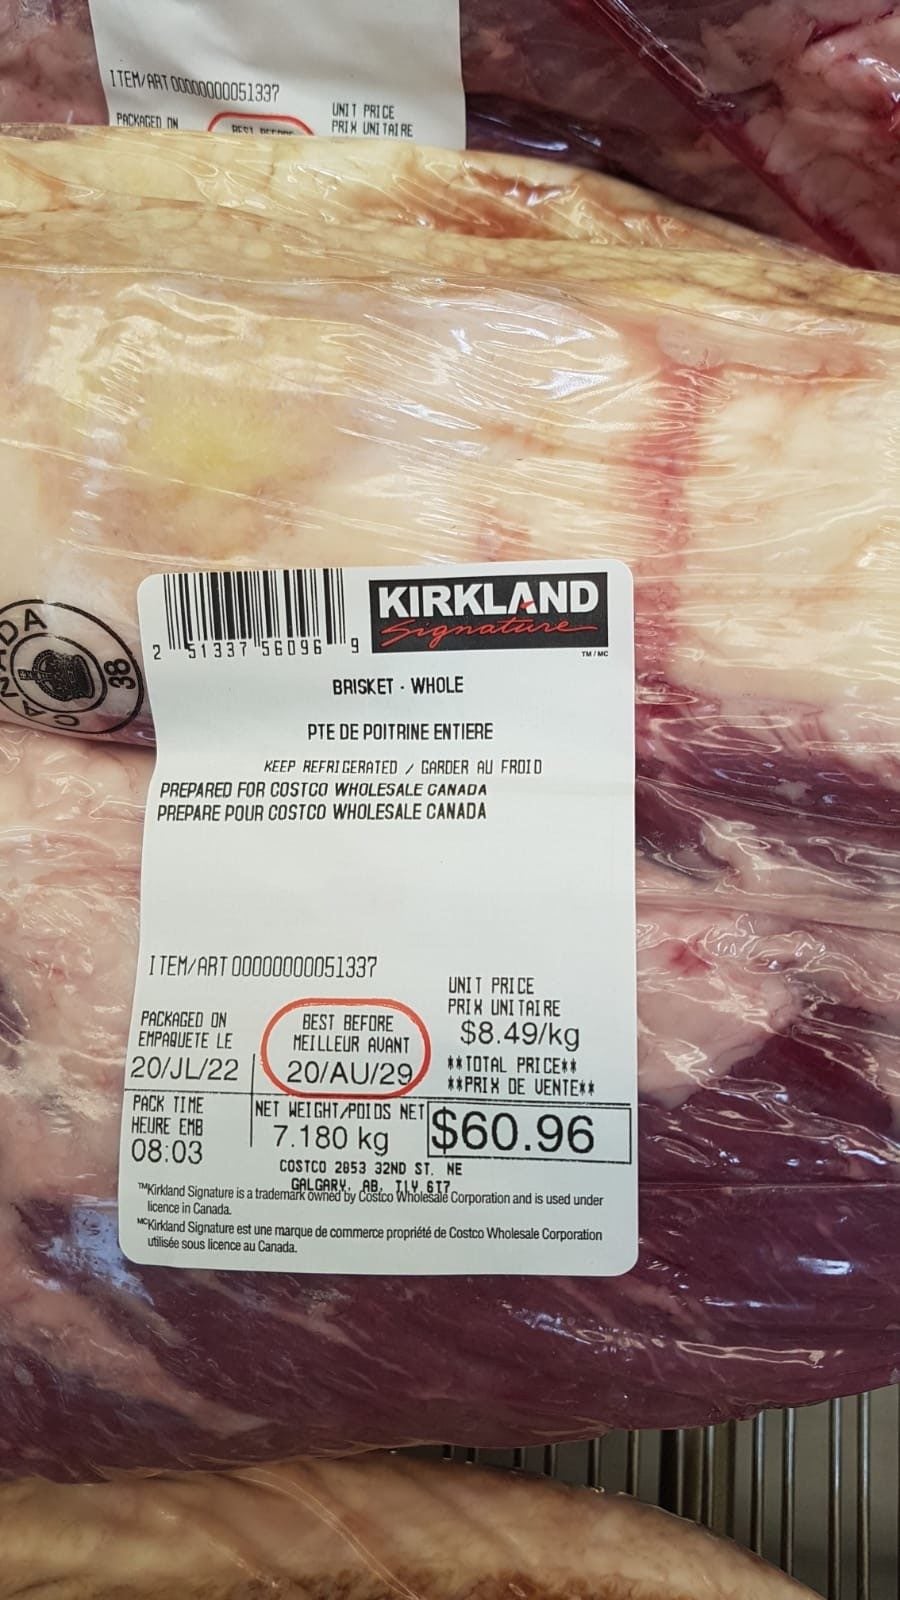 Costco Brisket Prices How do you Price a Switches?